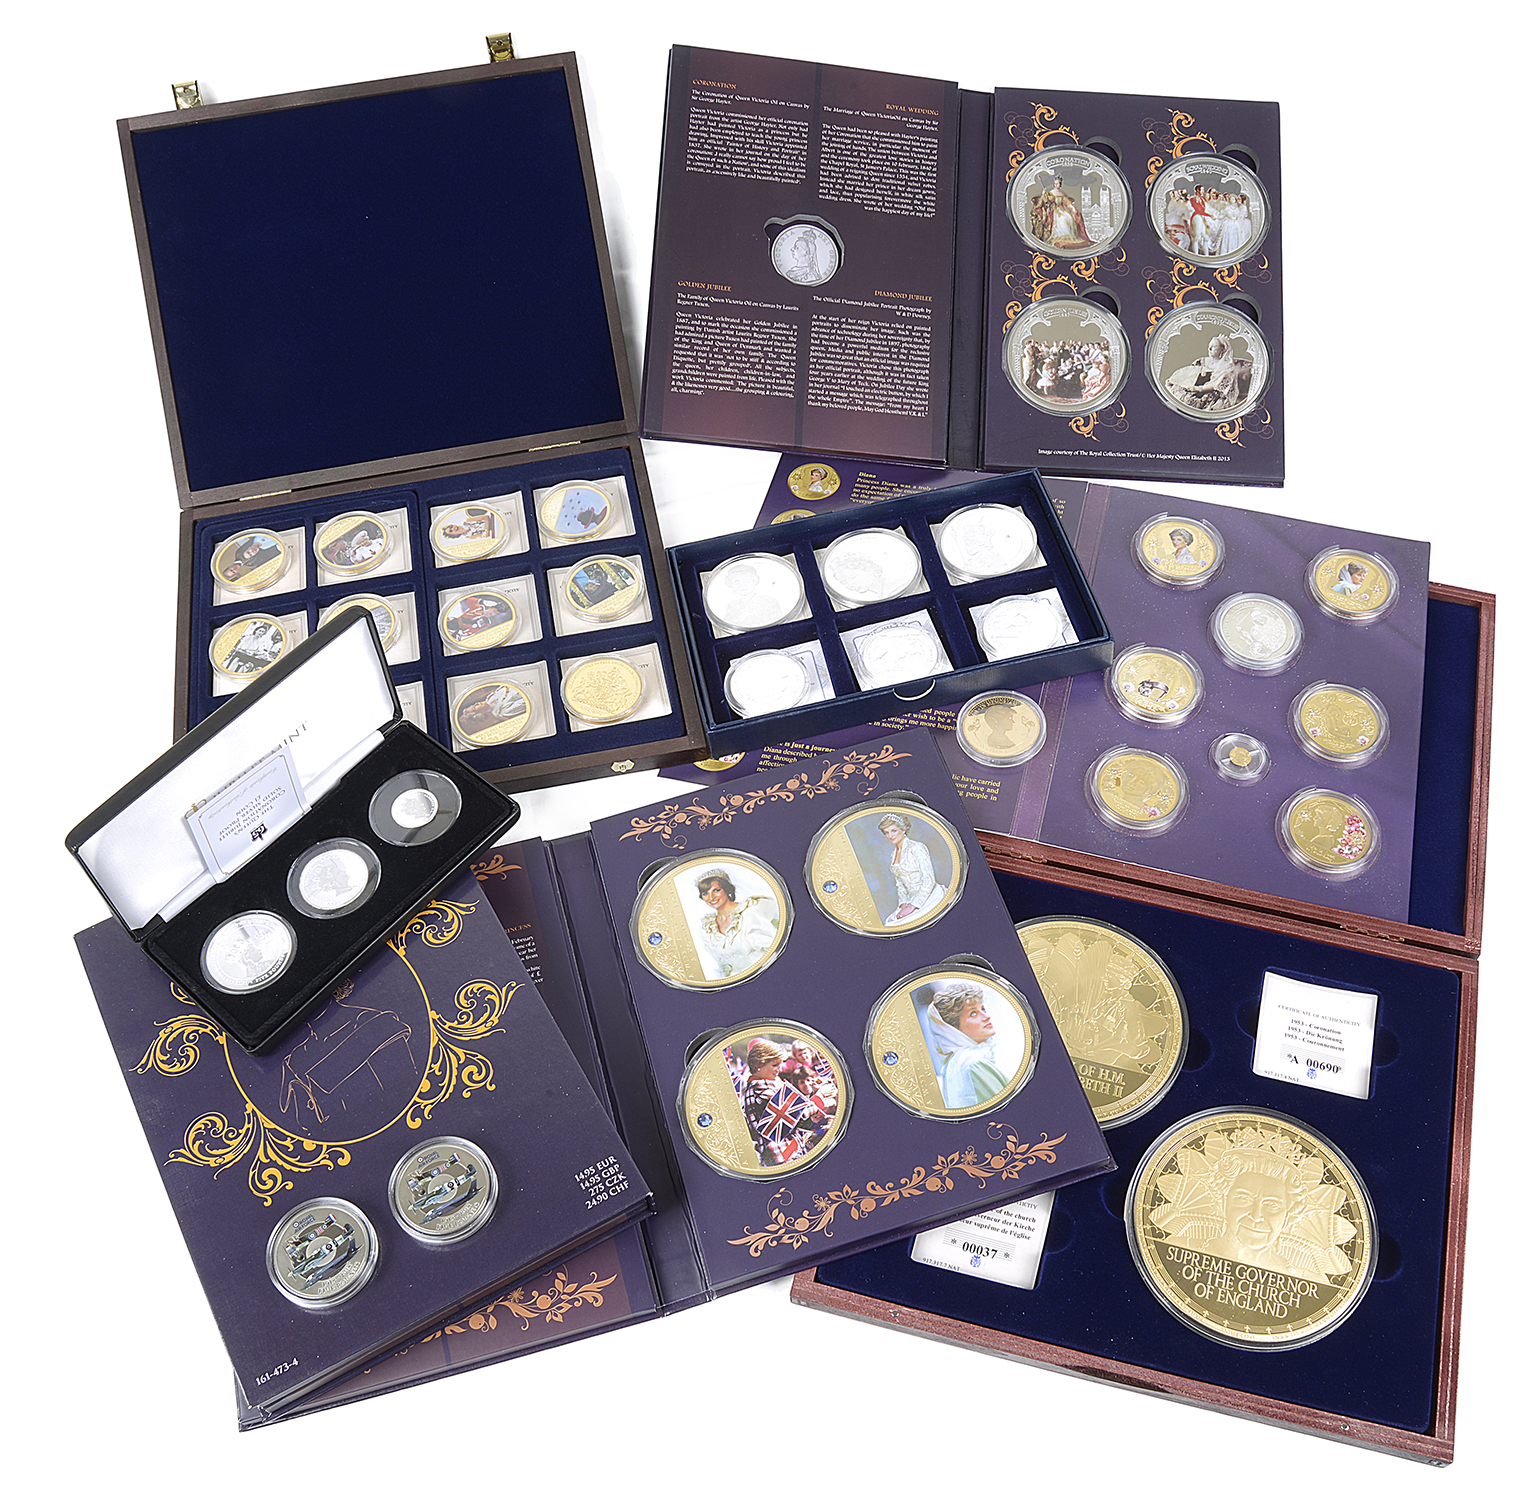 A collection of Commemorative Coinage